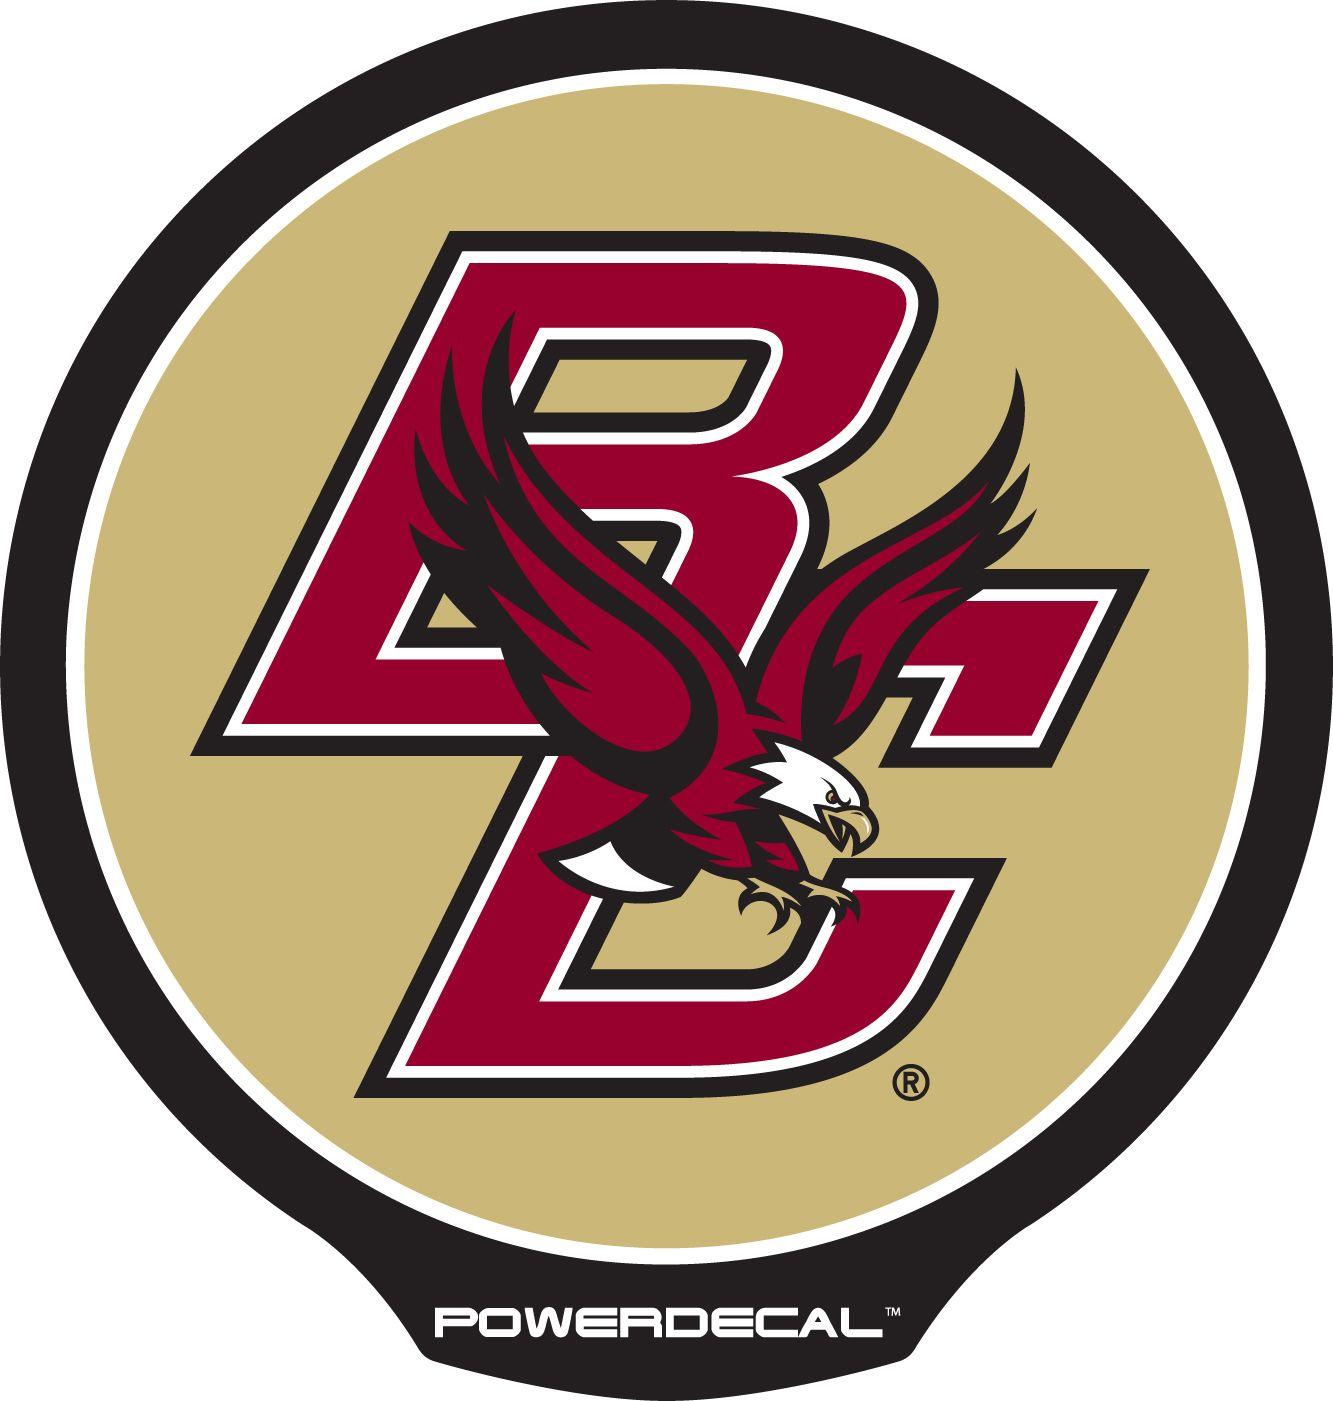 Black and Red Eagles Logo - PowerDecal PWR240201 Decal College Boston College Eagles Logo ...